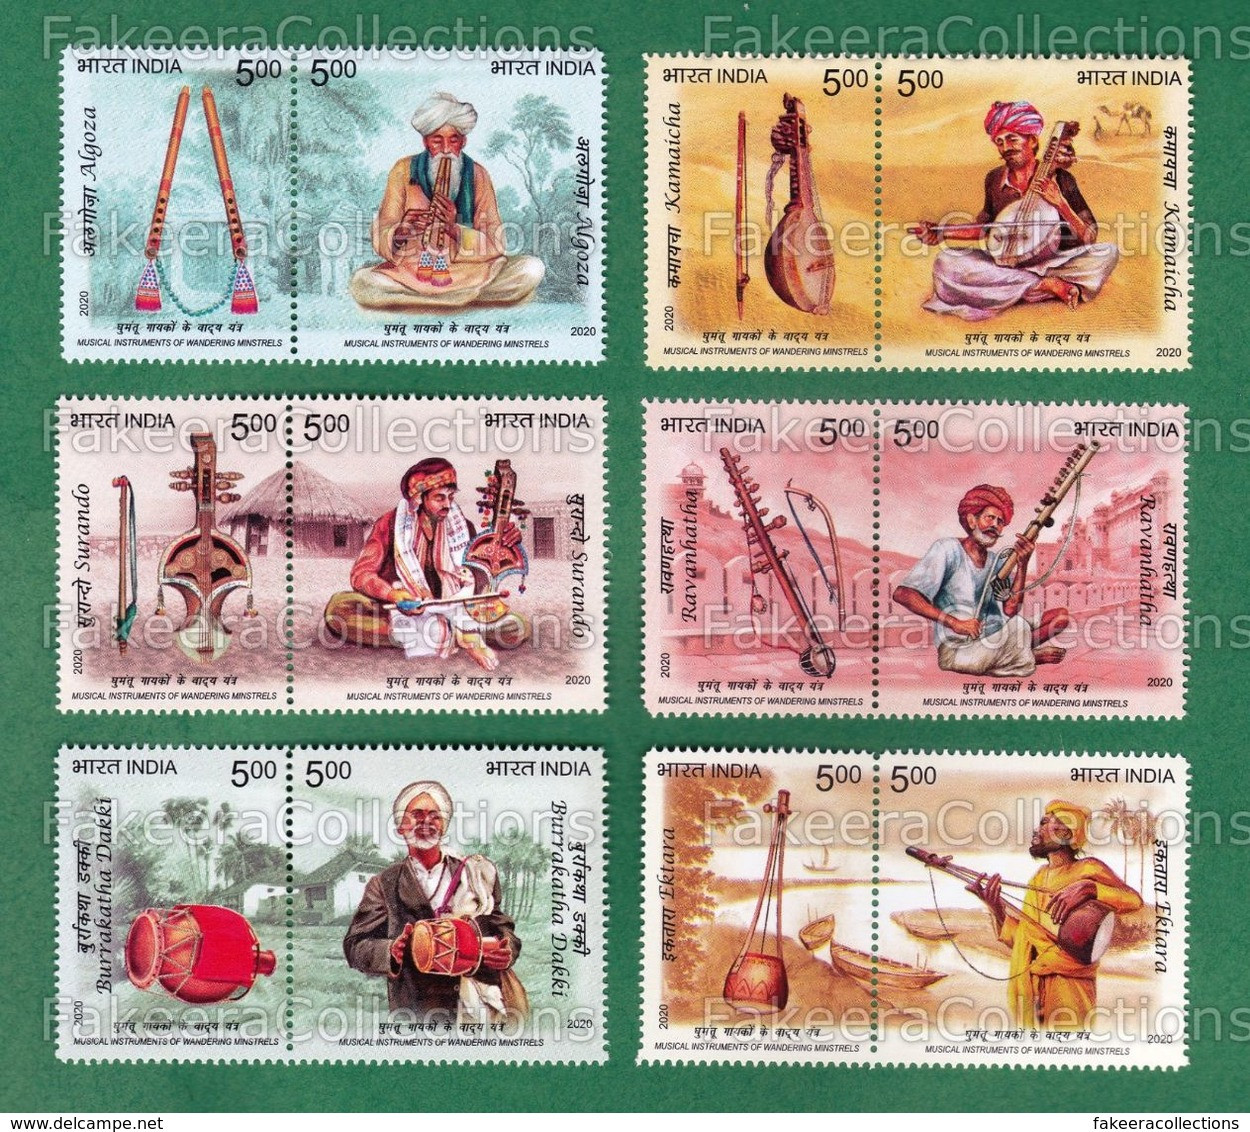 INDIA 2020 Inde Indien - MUSICAL INSTRUMENTS OF WANDERING MINSTRELS 12v Se-Tenant 6 Pair MNH ** - Music Culture Costumes - Unused Stamps